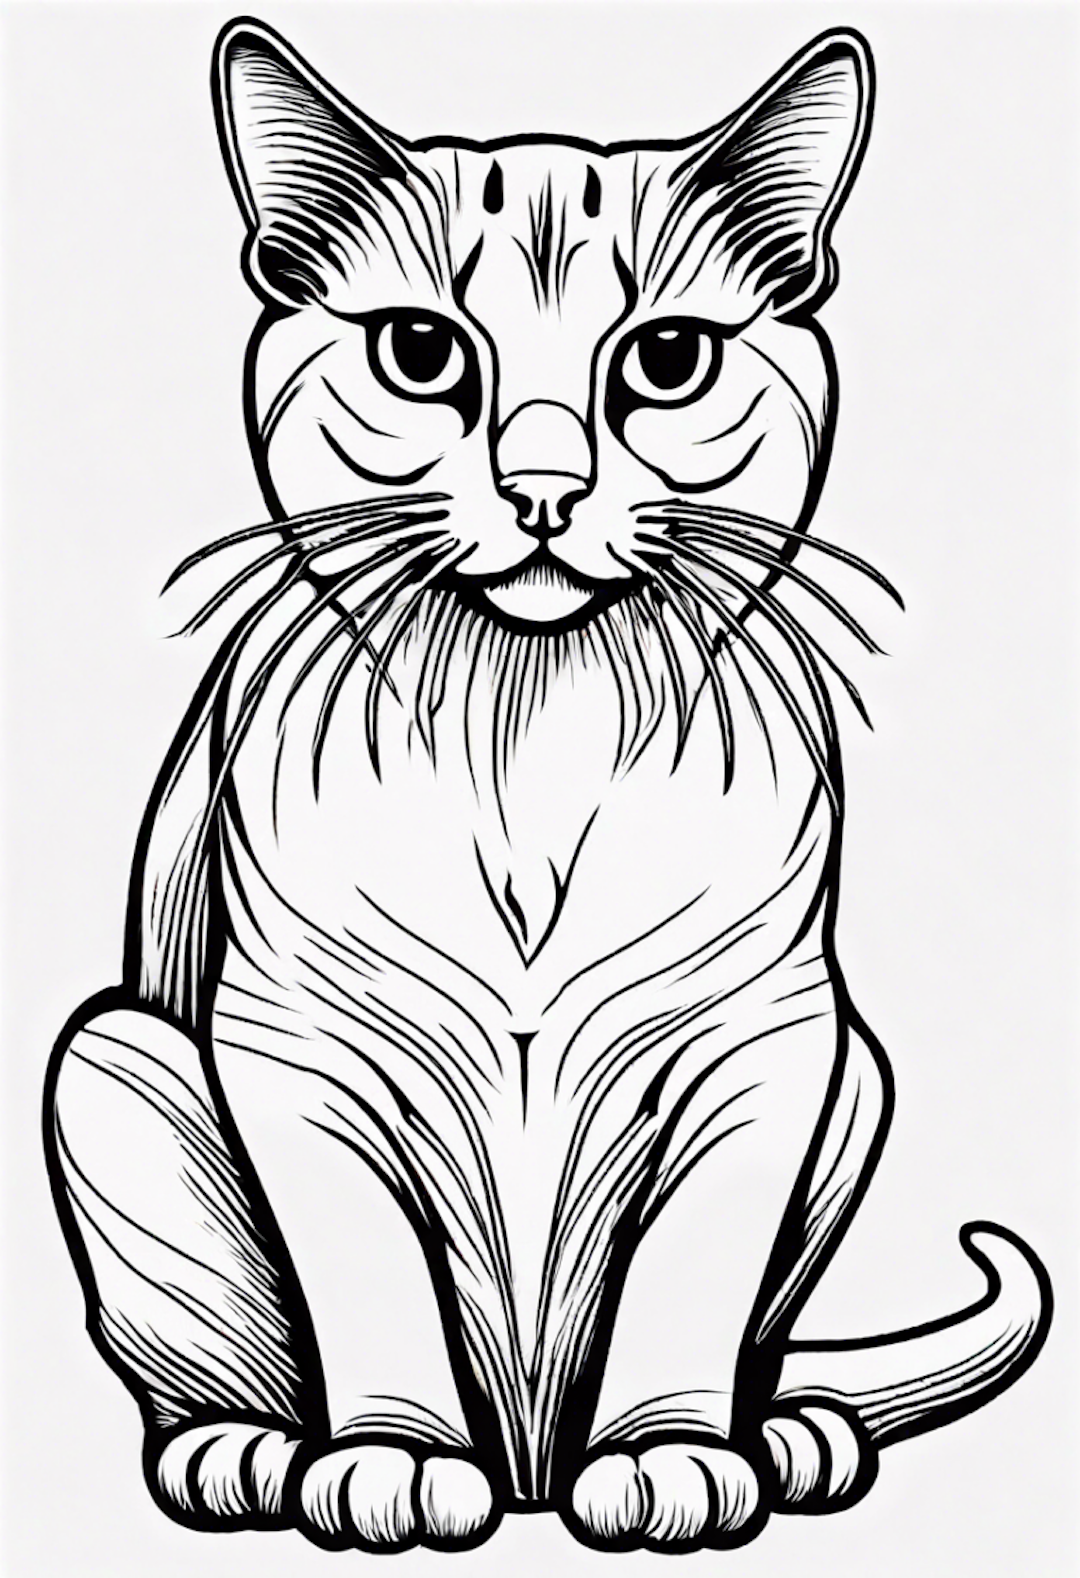 Kitty’s Serene Pose Coloring Page coloring pages